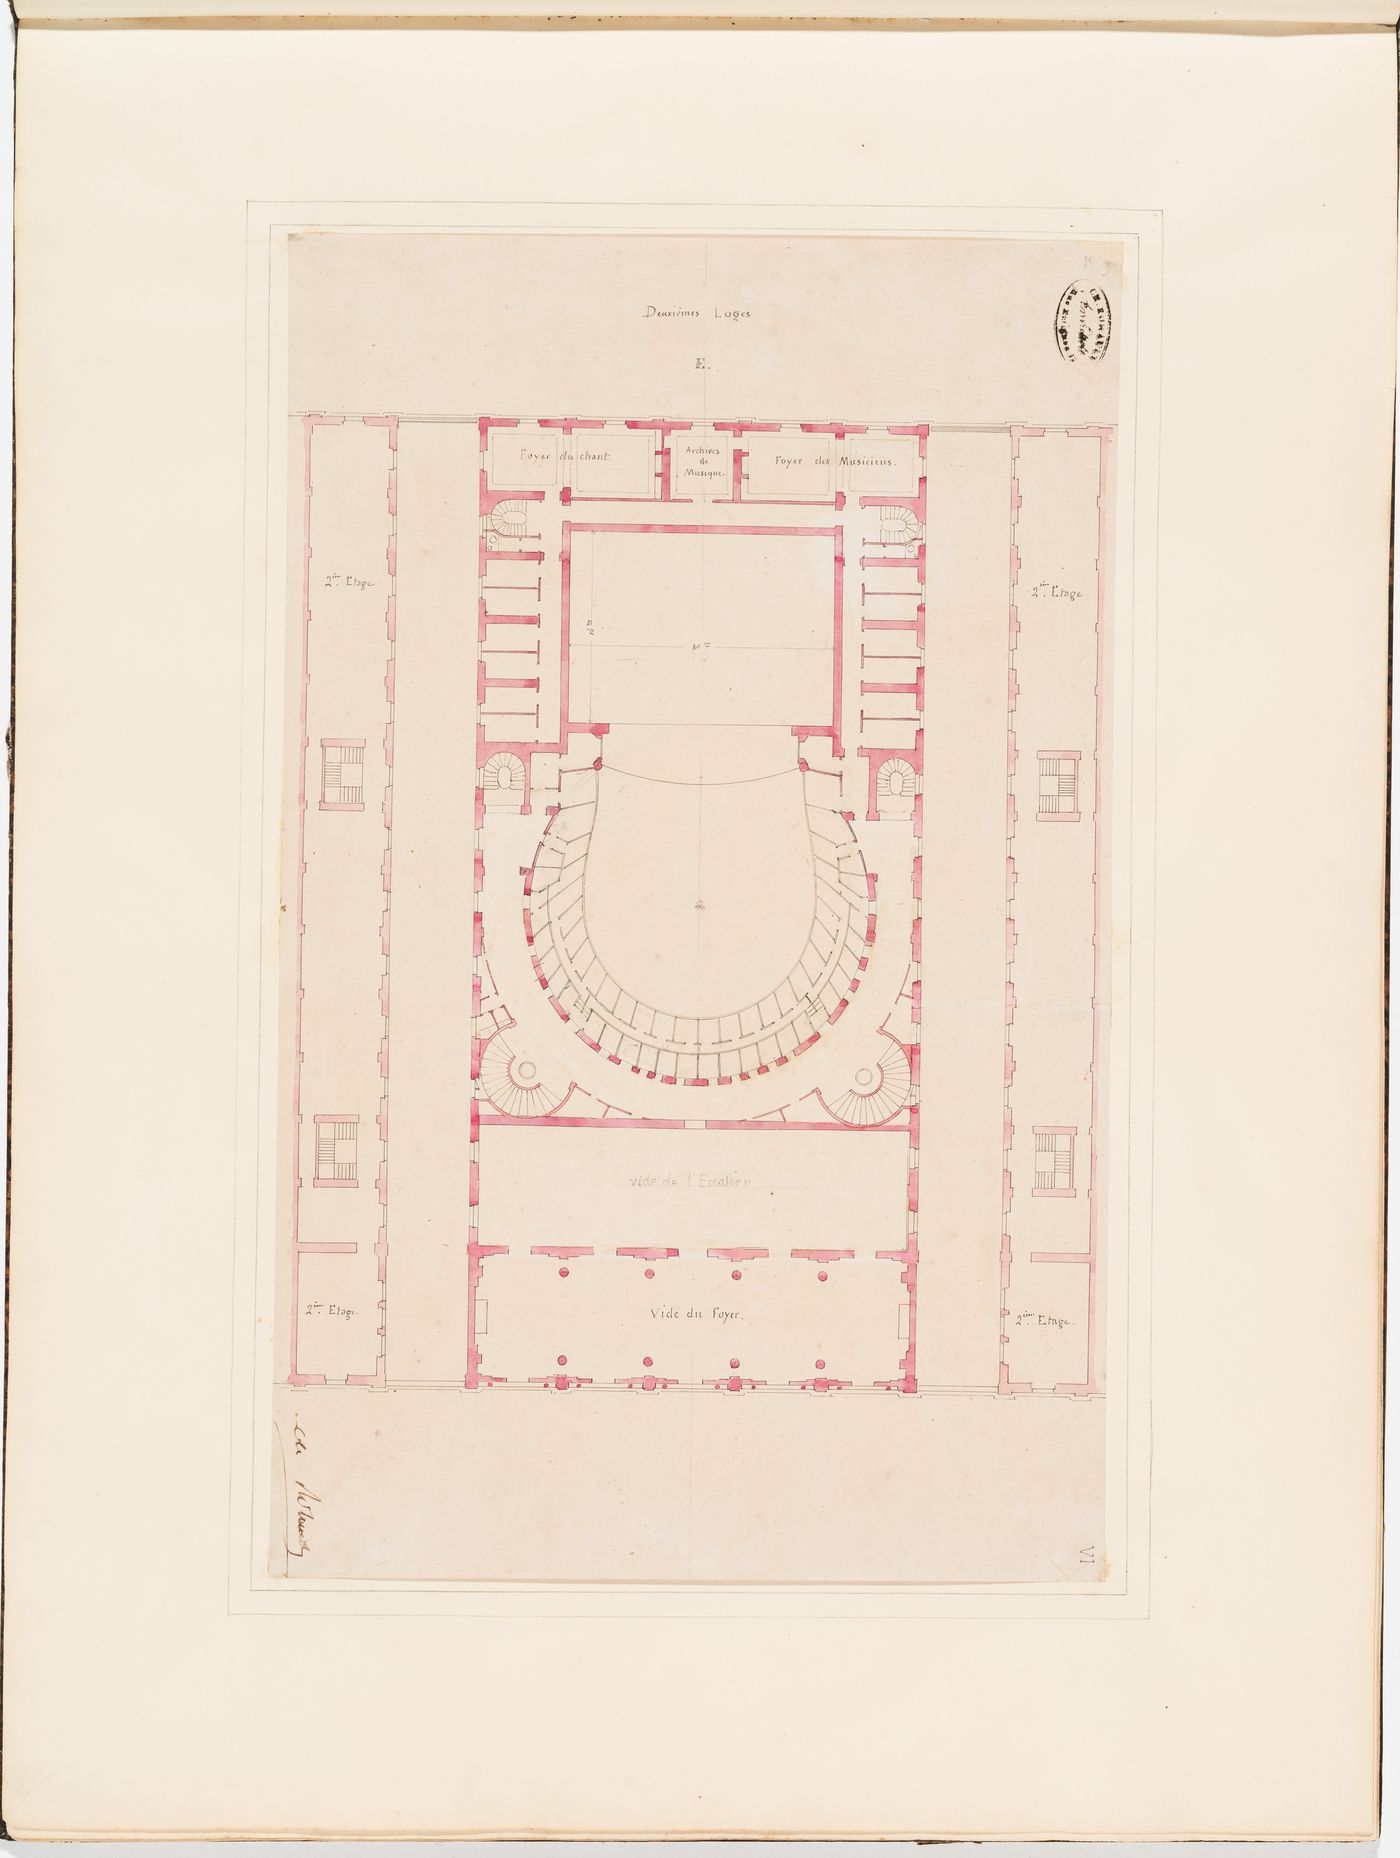 Plan for the "deuxièmes loges" for level E for the Théâtre Royal Italien, and two second floor plans for the adjacent shopping arcades